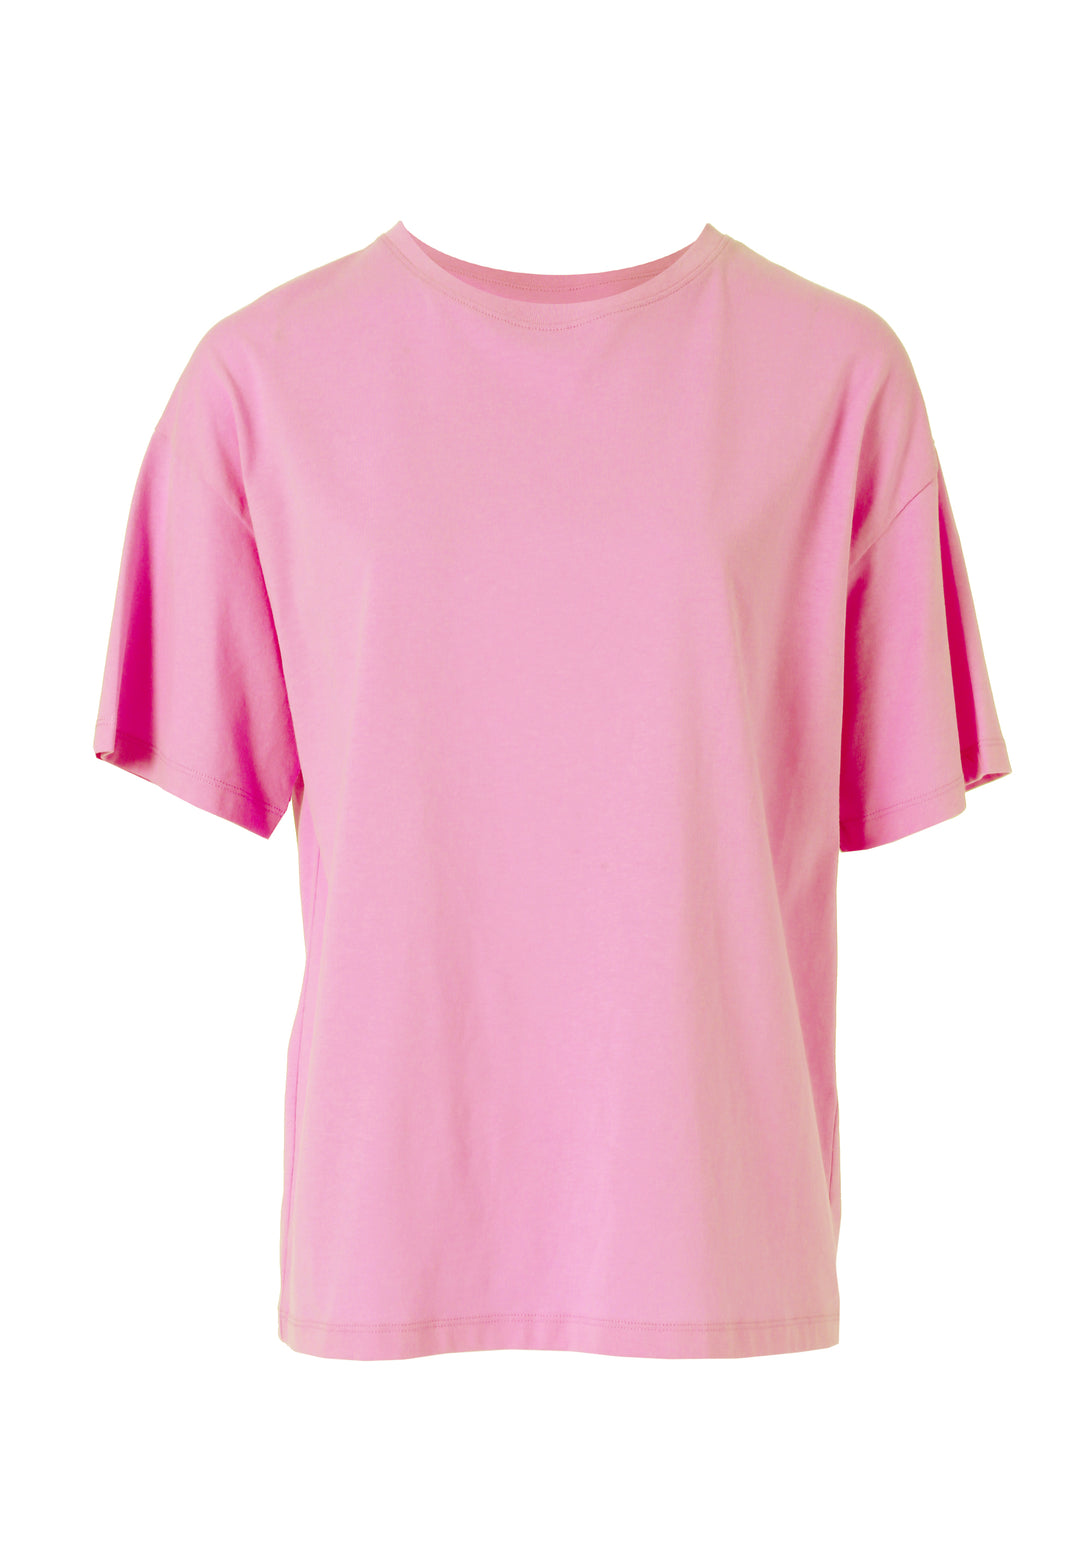 T-shirt wide fit made in cotton jersey Fracomina FP24ST3006J465N5-238-1